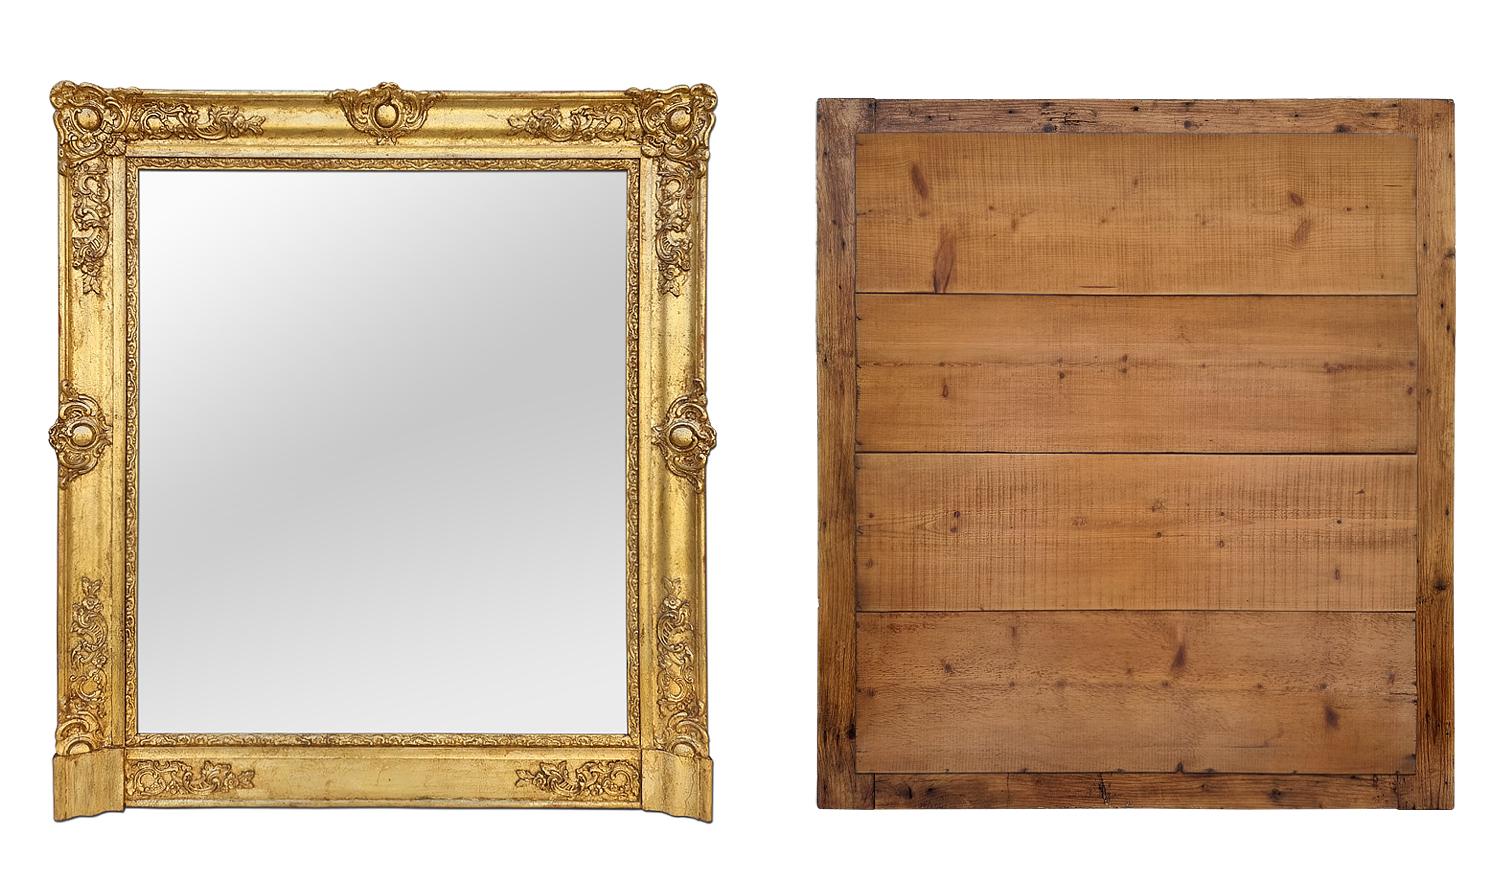 Fireplace Giltwood Mirror, French Restoration Period, circa 1820 For Sale 2